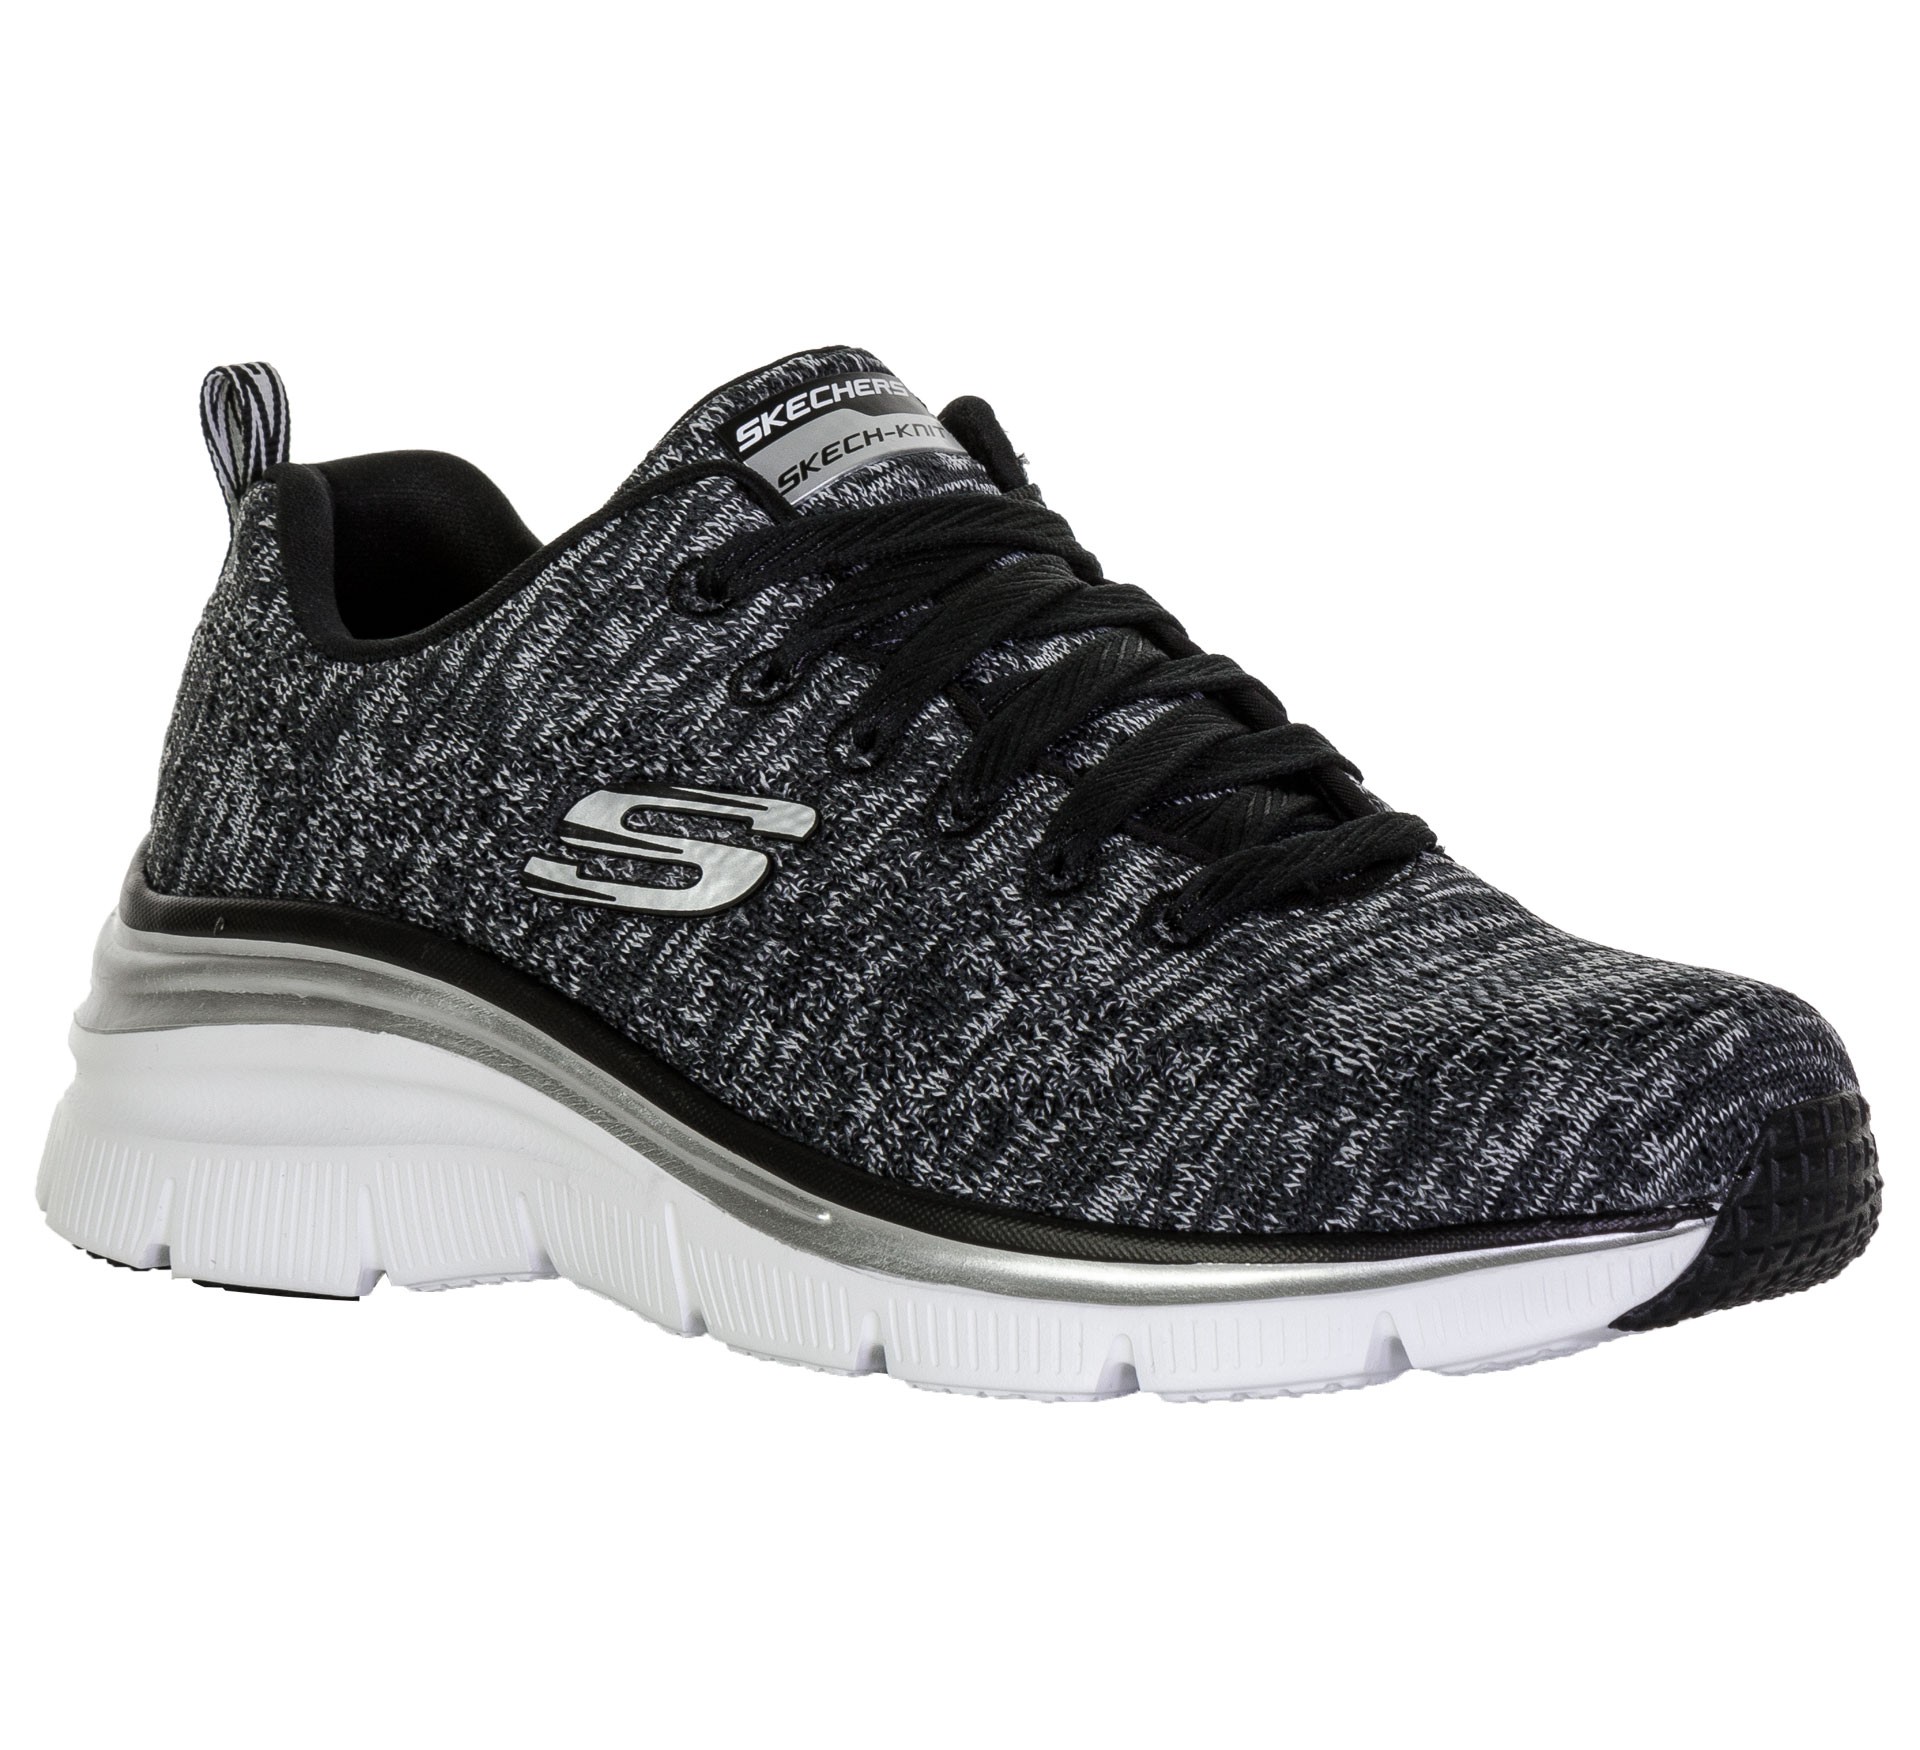 Plutosport - Skechers Fashion Fit - Style Chic